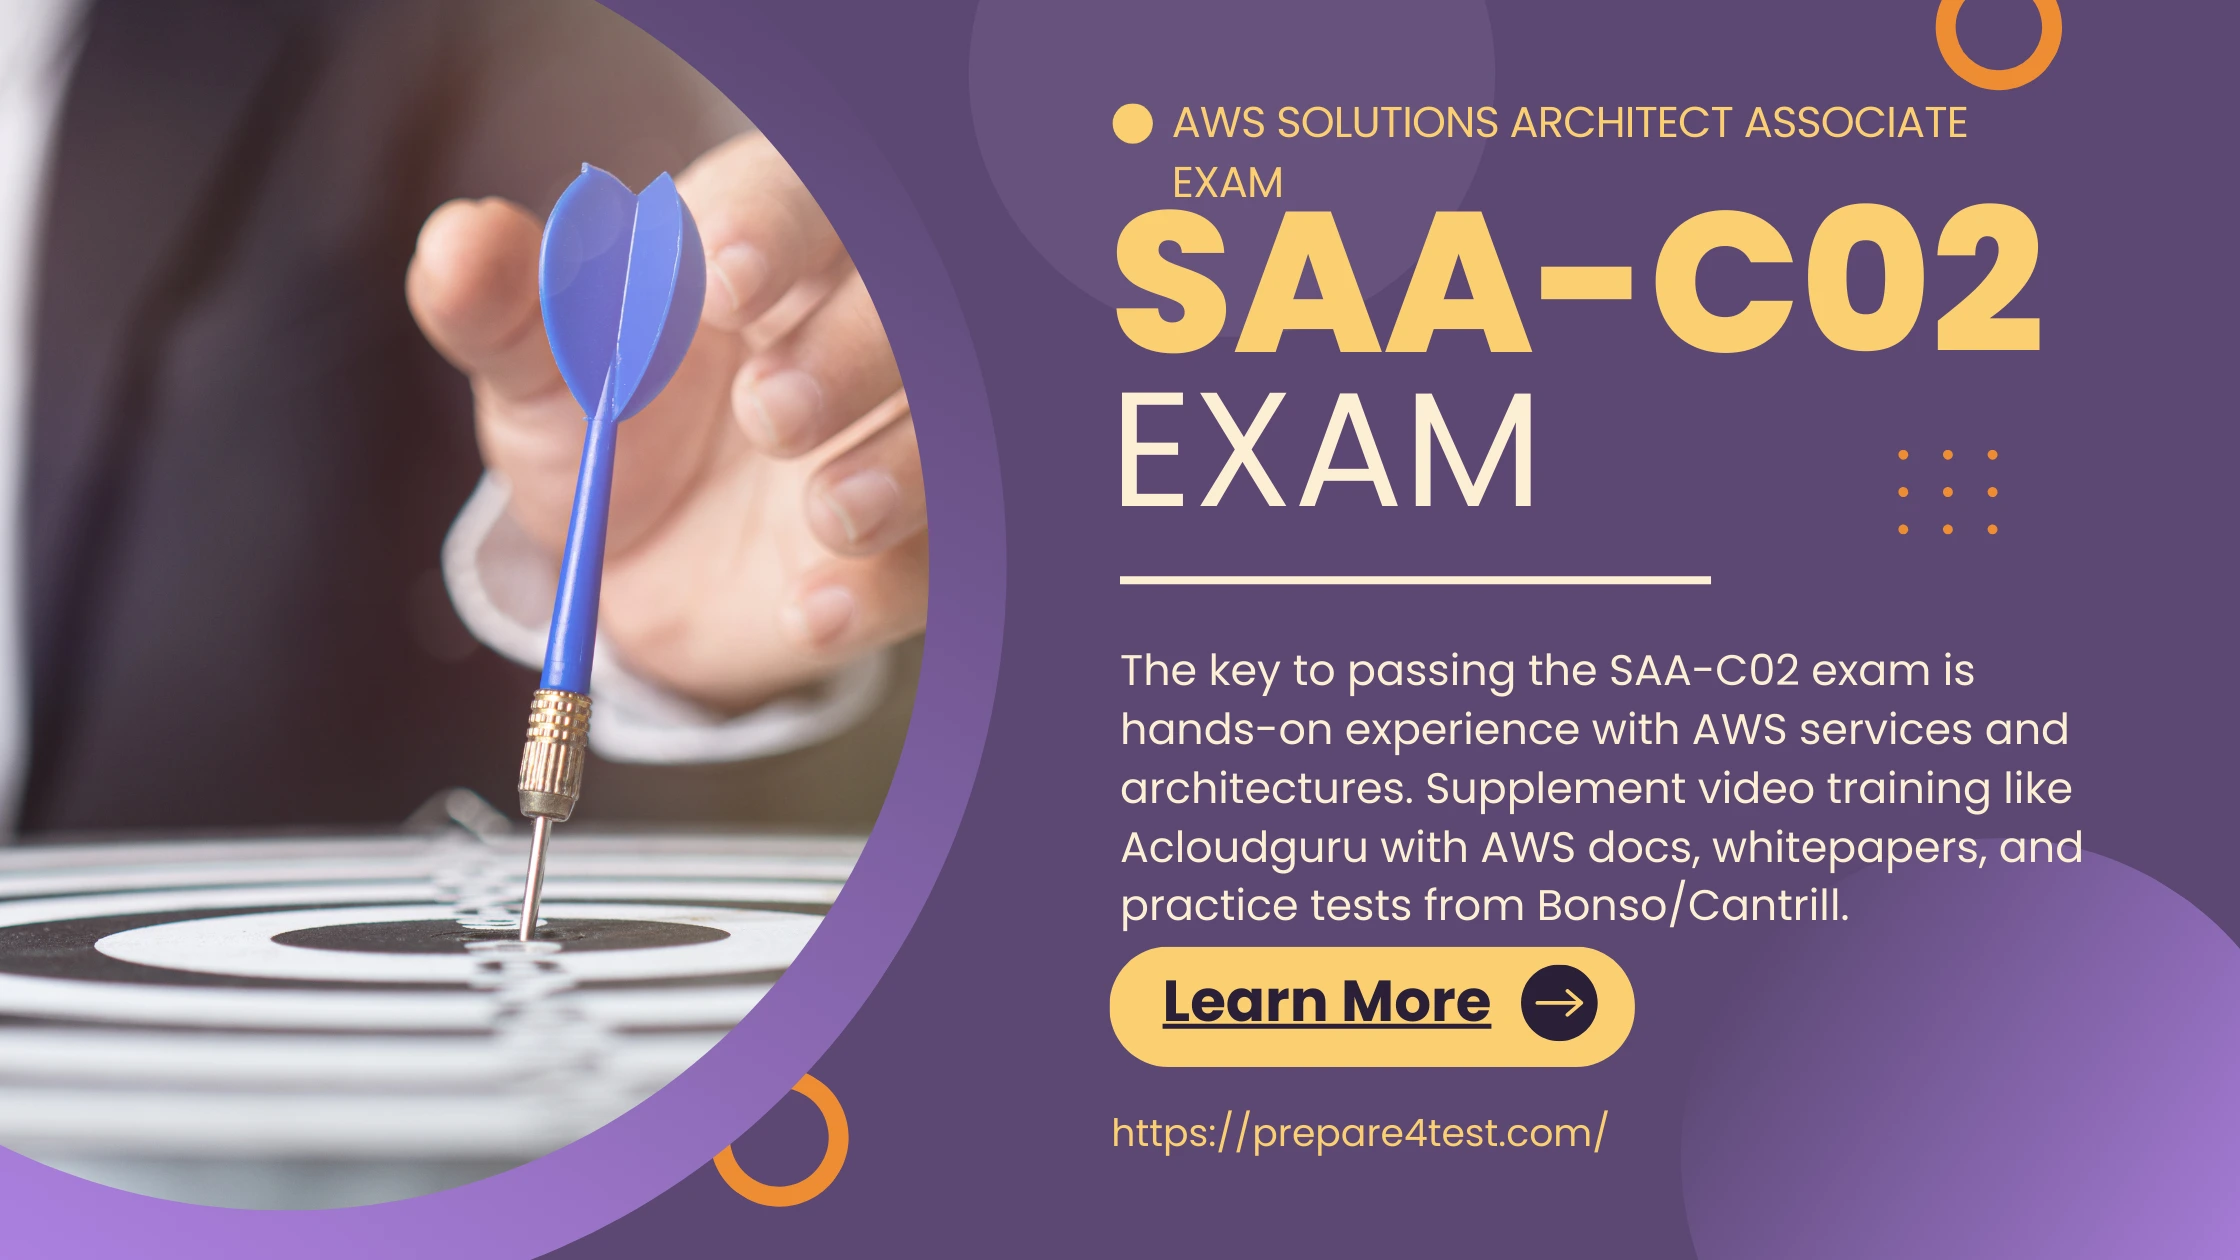 The Acloudguru SAA-C02 course is one of the most popular and comprehensive training options for passing the AWS Certified Solutions Architect - Associate exam.